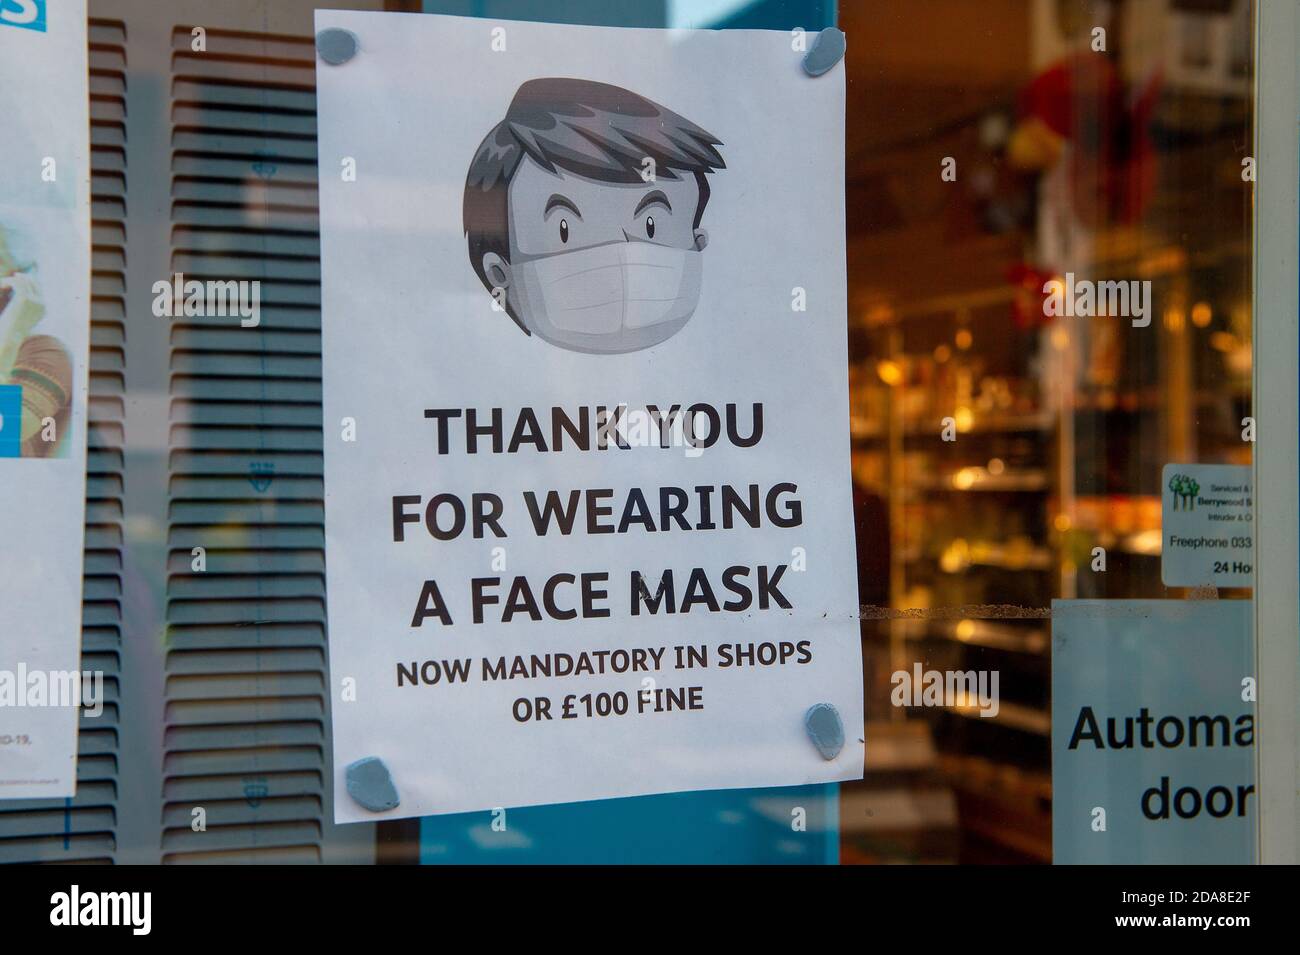 Sunninghill, Berkshire, UK. 10th November, 2020. A Covid-19 face mask sign in a corner shop in Sunninghill reminding customers that they may be fined £100 if they fail to wear a facemask. Credit: Maureen McLean/Alamy Stock Photo